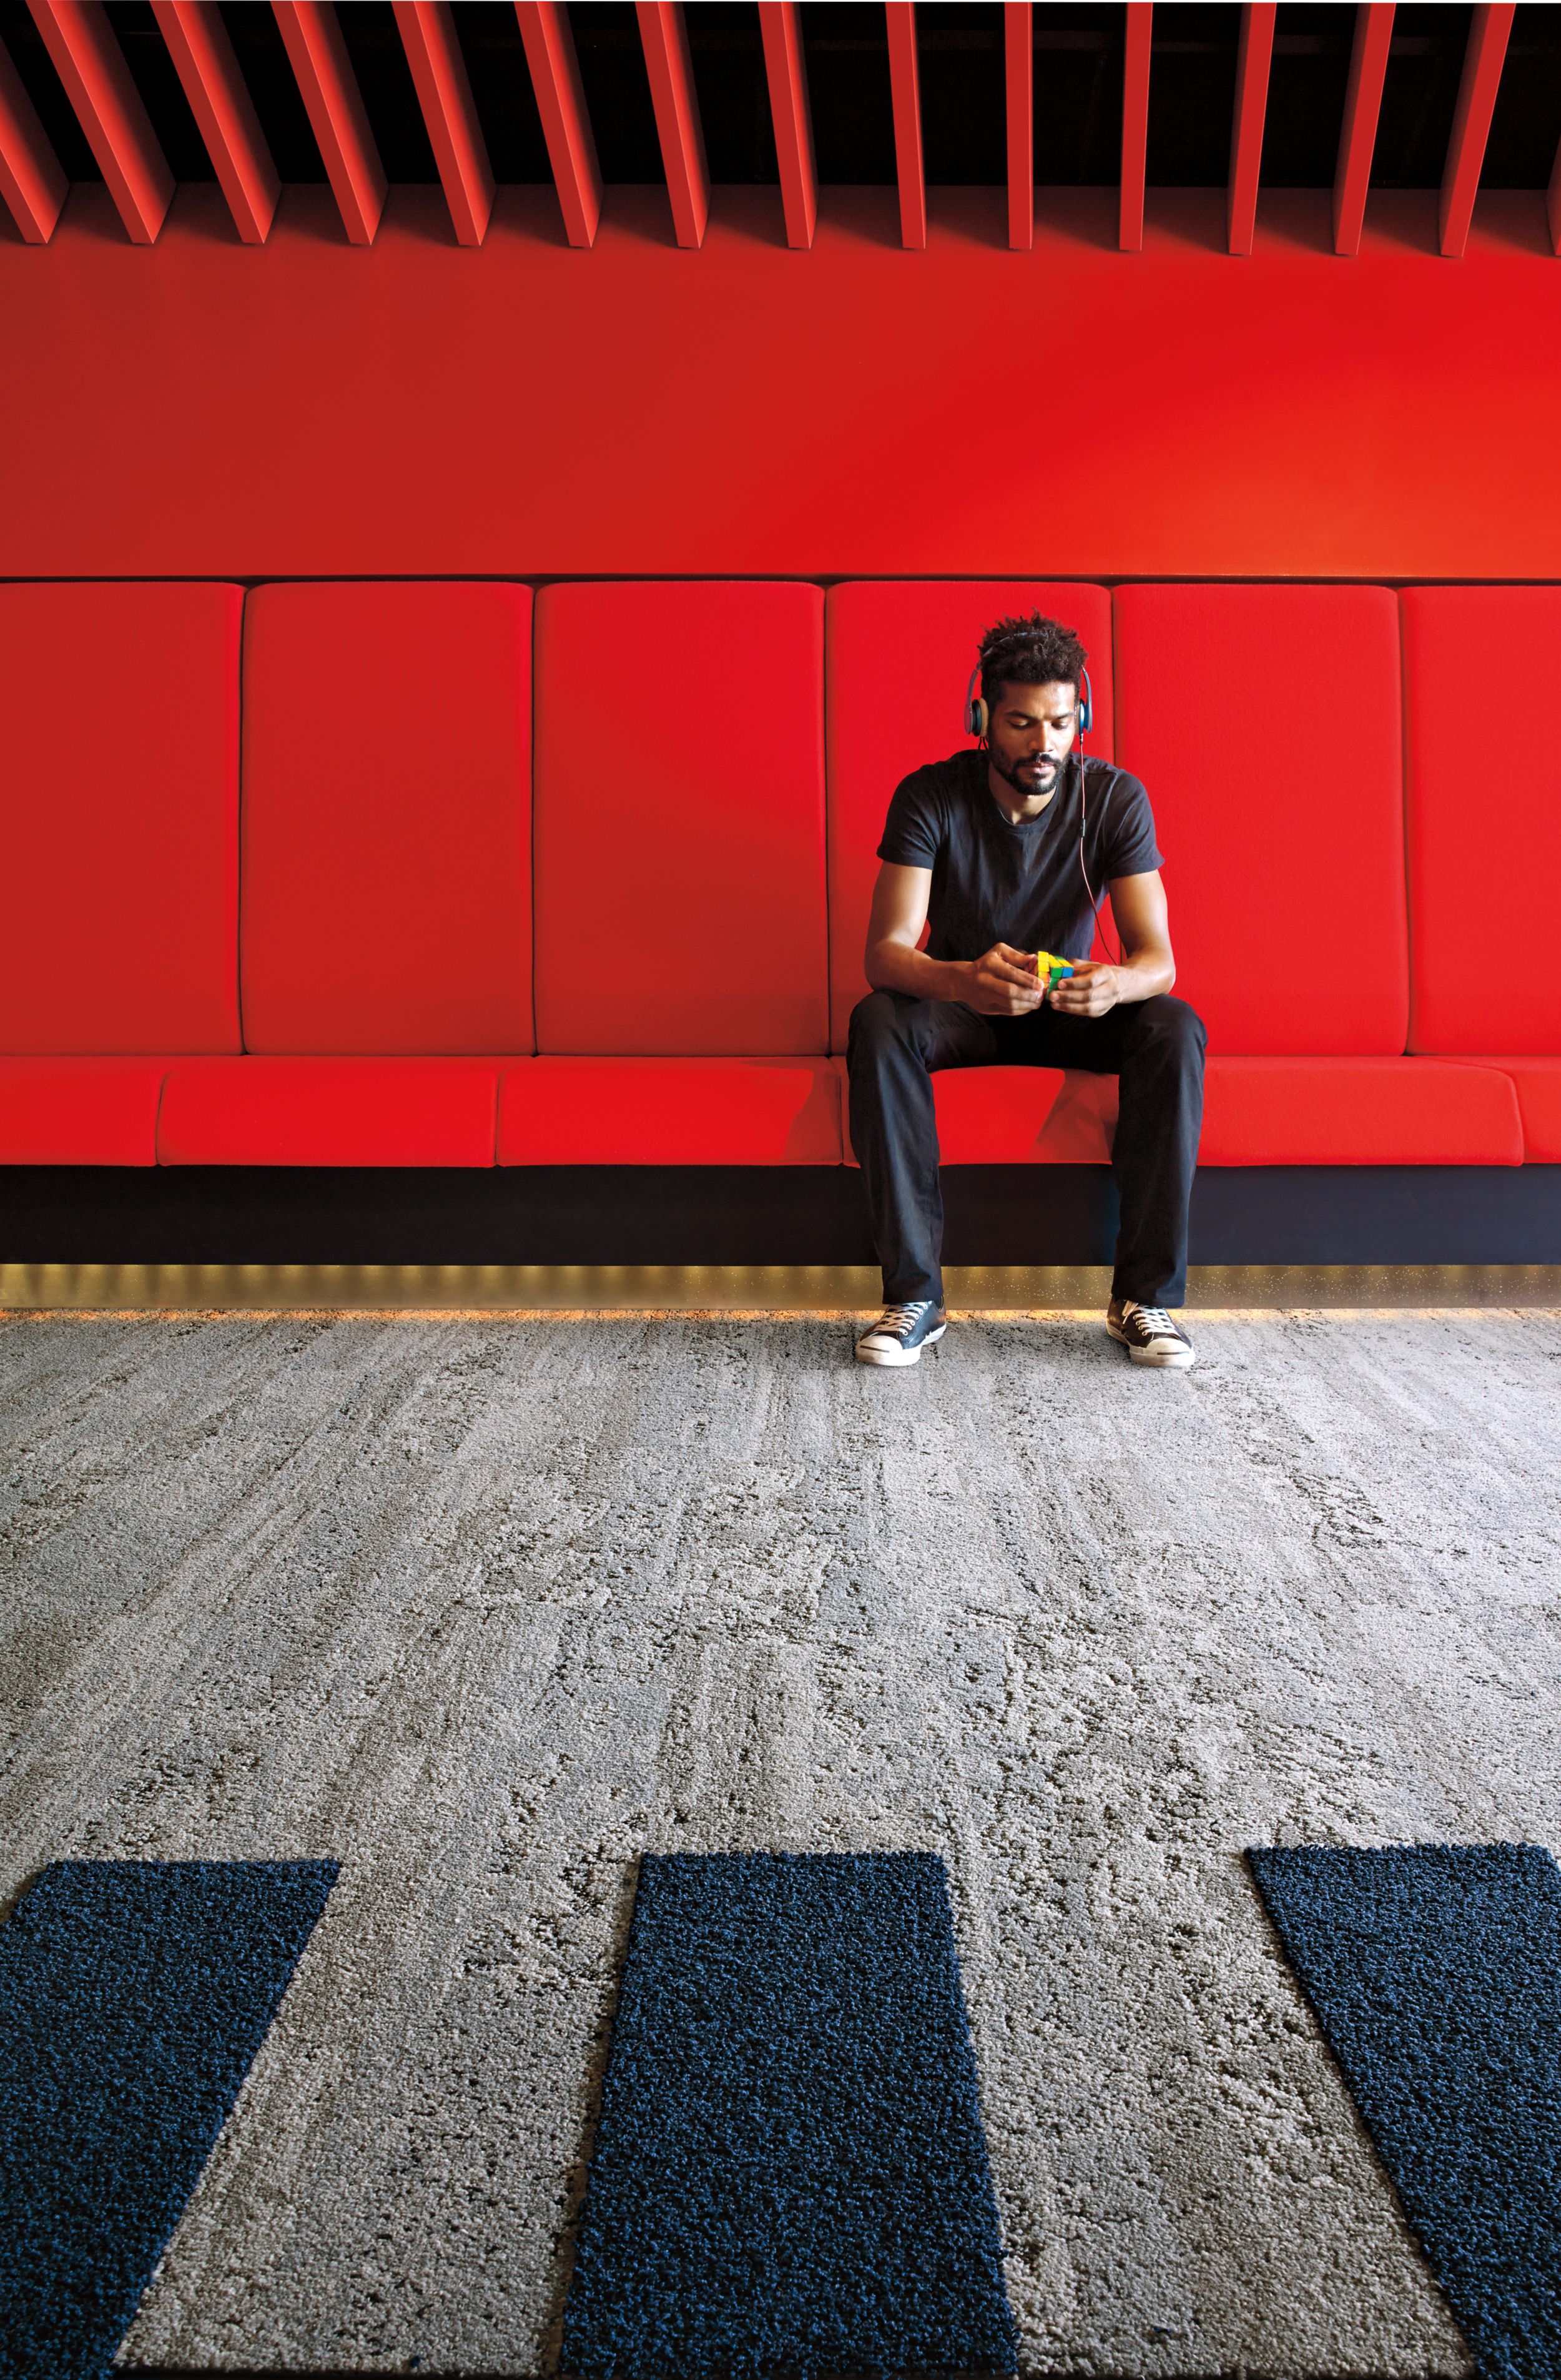 Interface HN810 plank carpet tile in waiting area with red bench and wall and man listening to music número de imagen 7